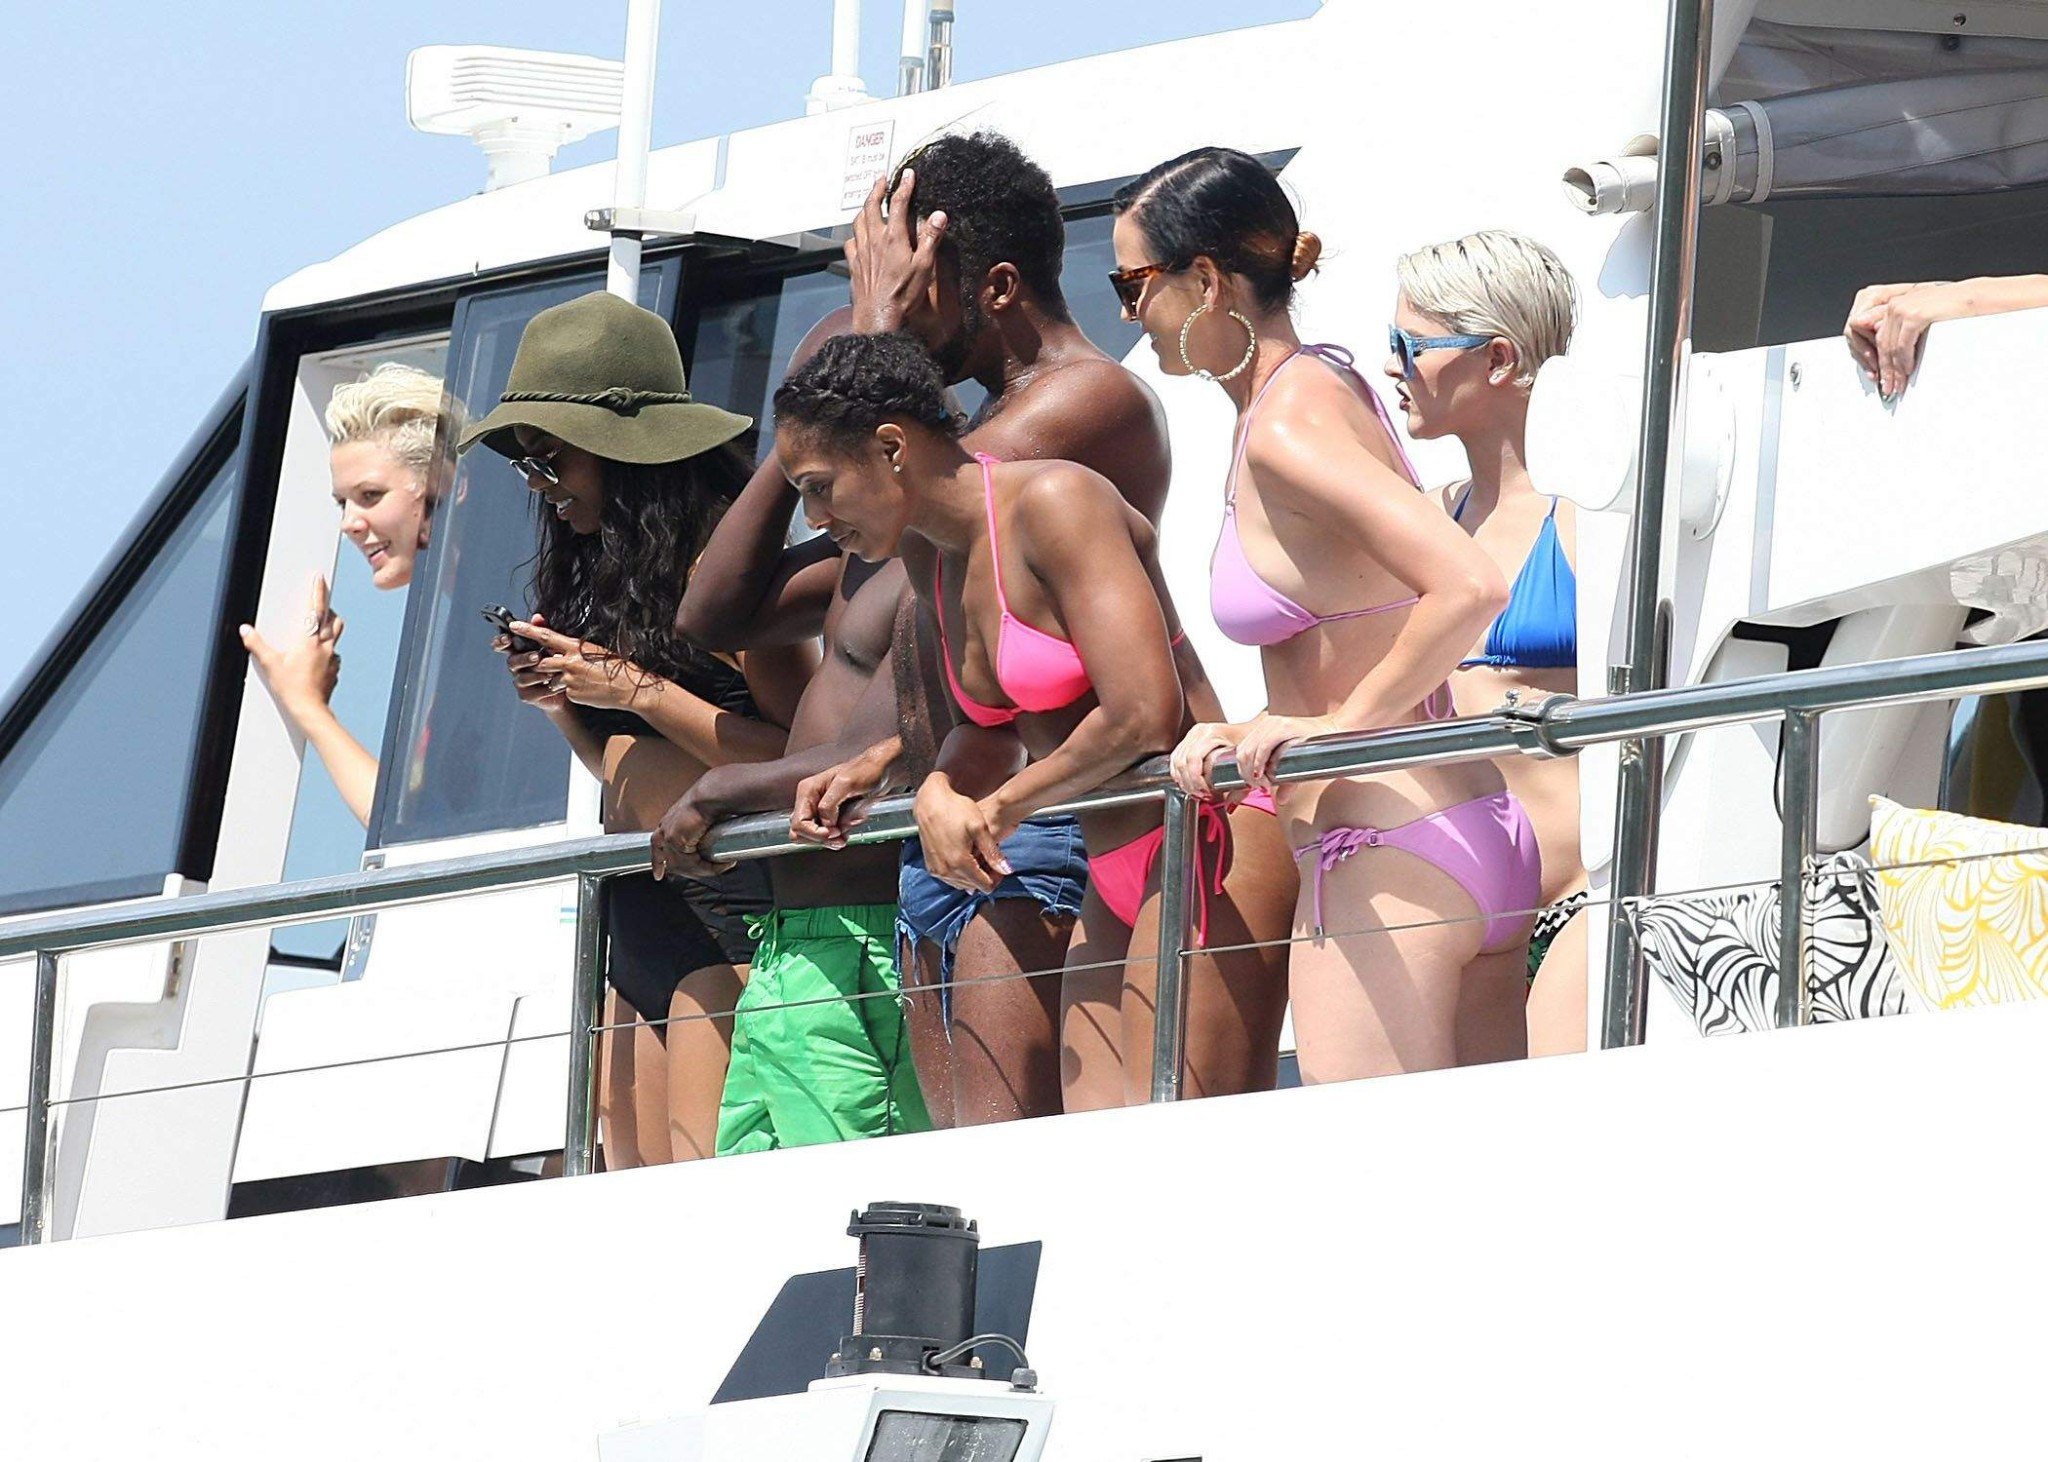 Katy Perry showing off her bikini body and cameltoe on a yacht in Sydney